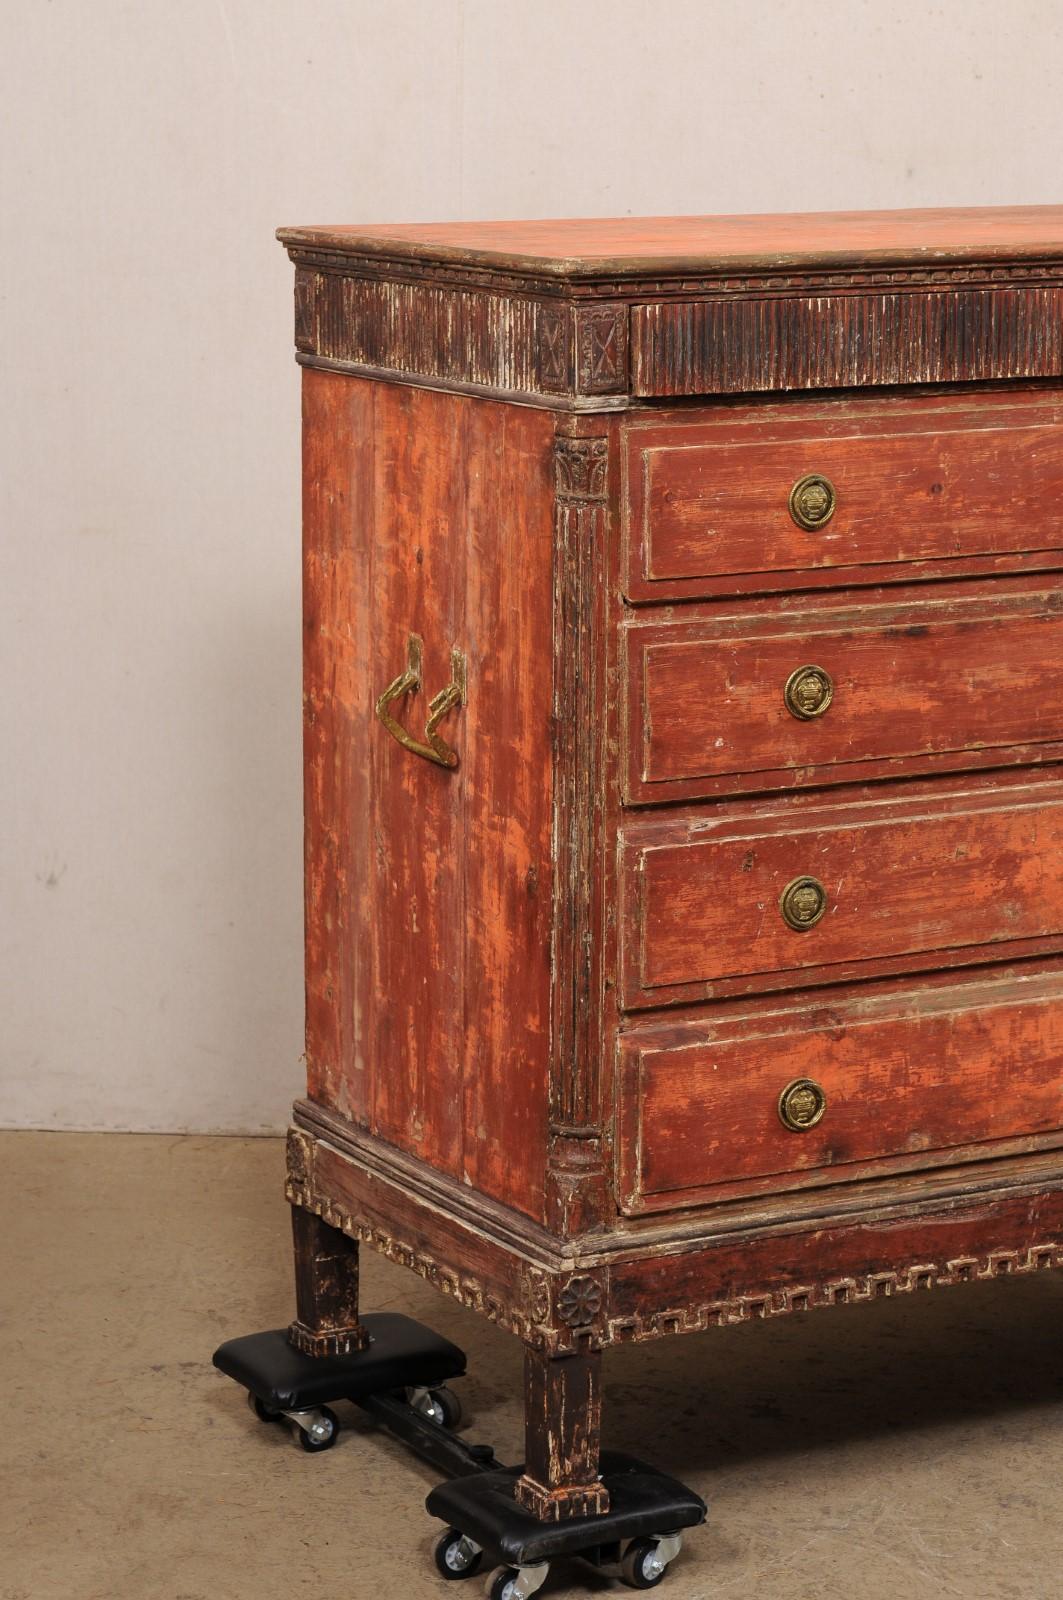 A Swedish Gustavian period chest, scraped to the original colors, from the turn of the 18th and 19th century. This antique chest from Sweden features clean lines outlined in magnificent carved details. The rectangular shaped top has dentil carved